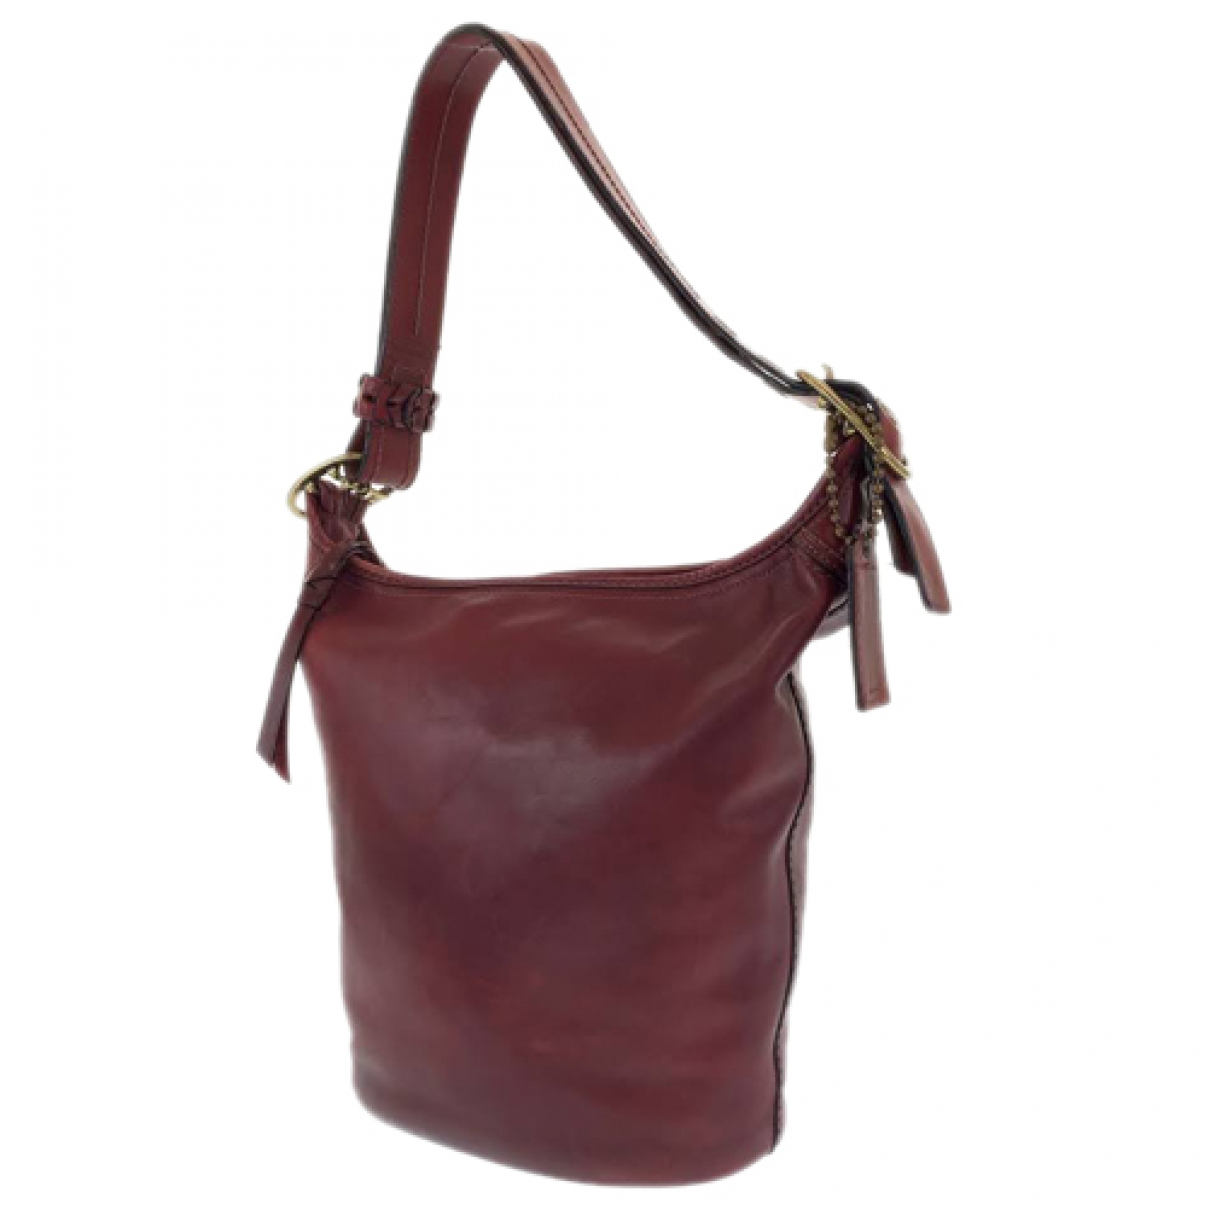 Leather Fixed price for sale handbag Purchase